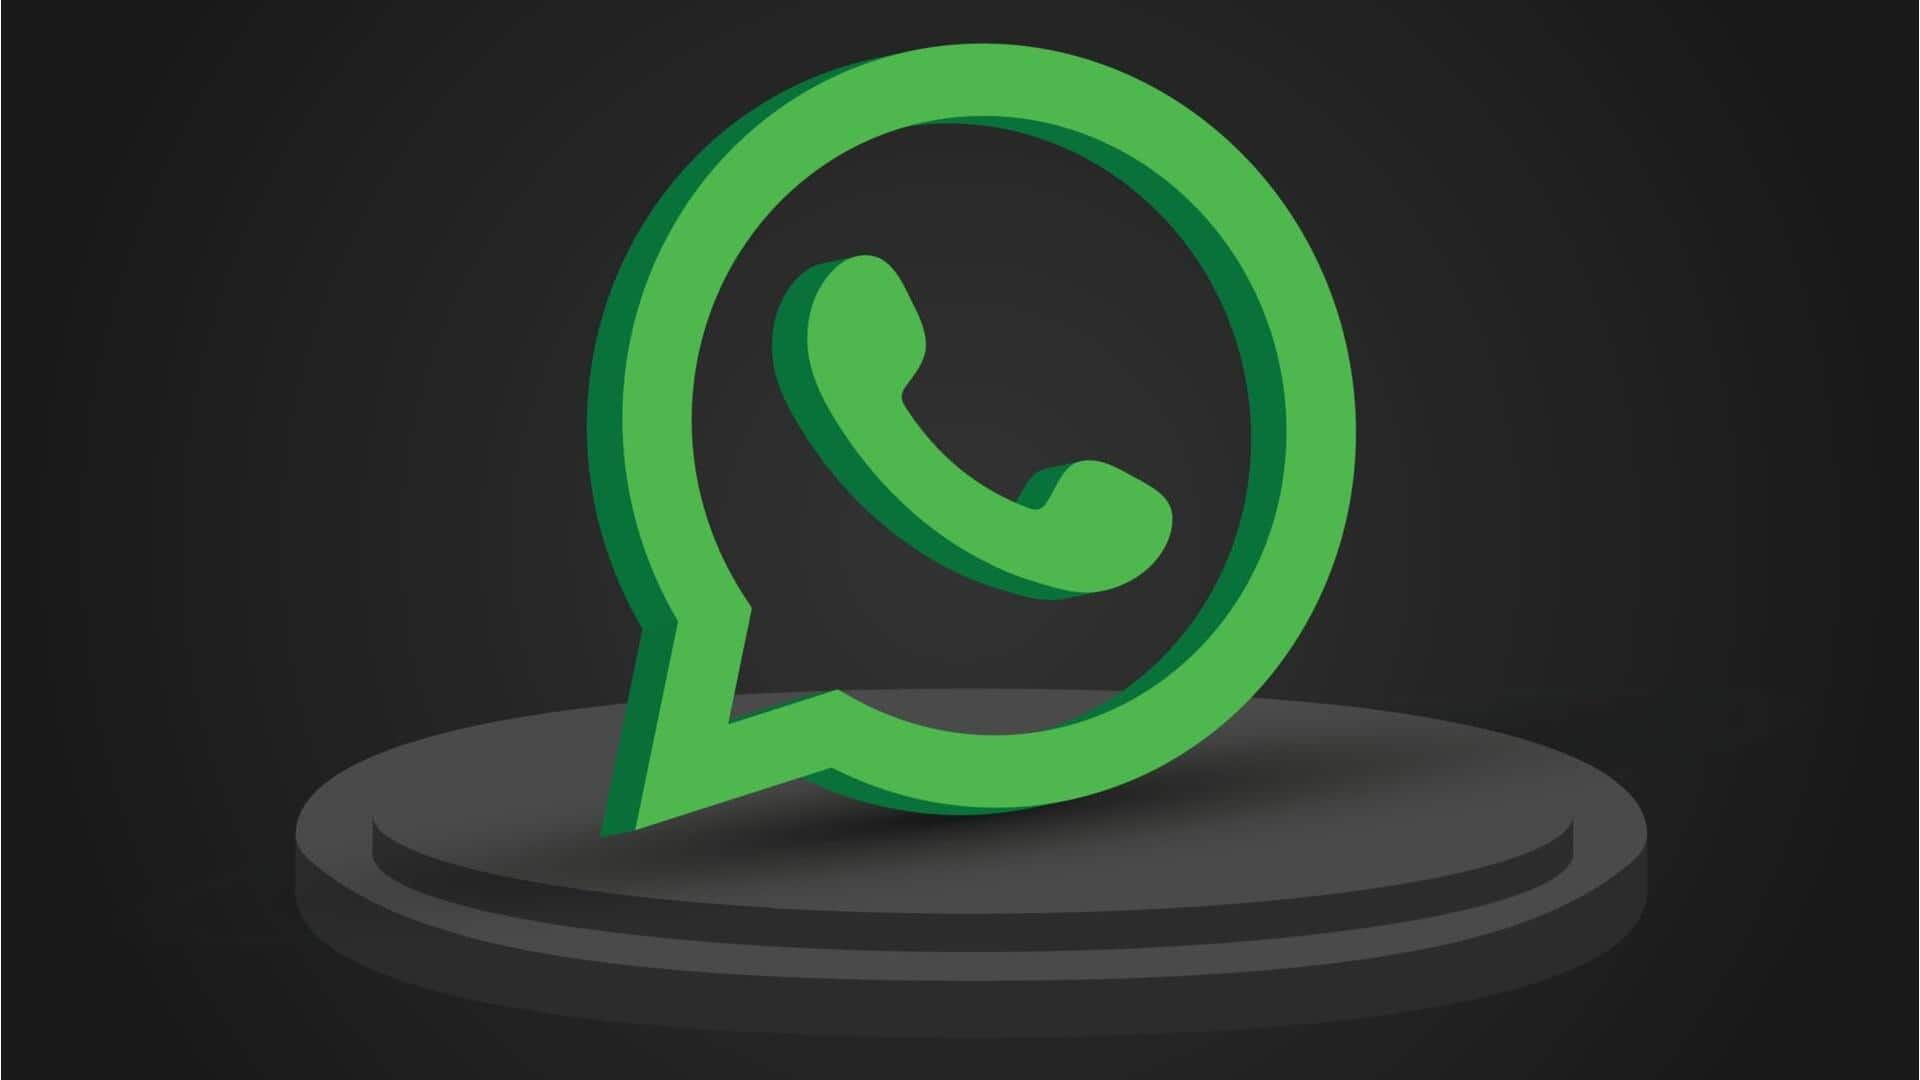 WhatsApp users can now initiate group calls with 15 participants